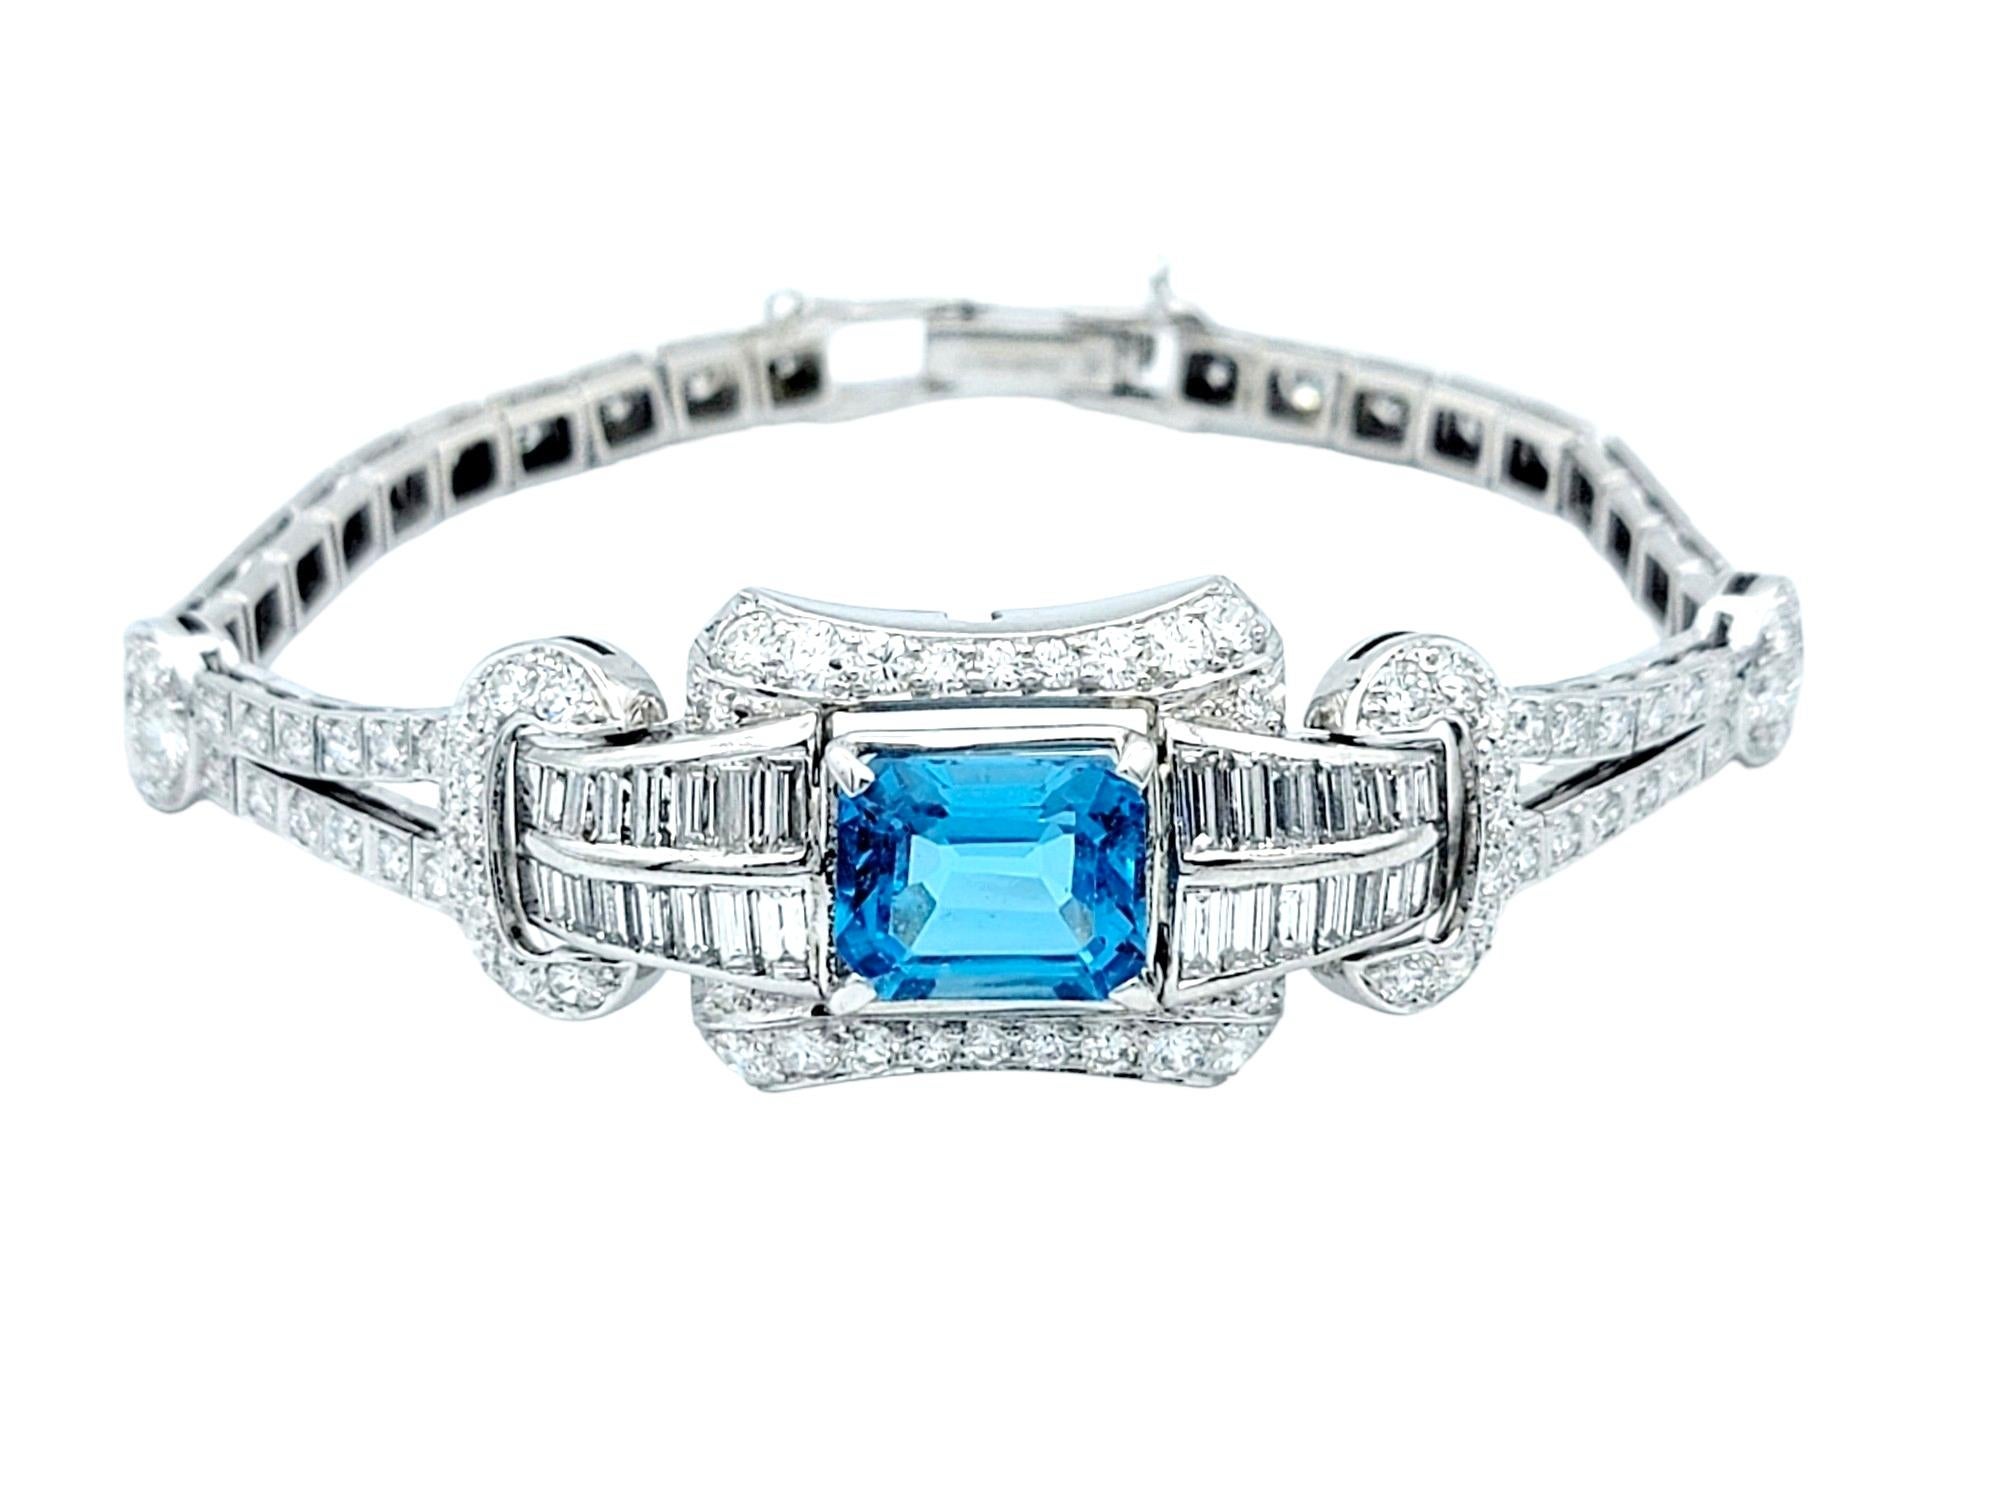 A timeless masterpiece from the Art Deco era, this exquisite vintage bracelet exudes elegance and sophistication. Crafted in lustrous polished platinum, the enchanting blue stone paired with the dazzling diamonds makes this a piece you won't be able